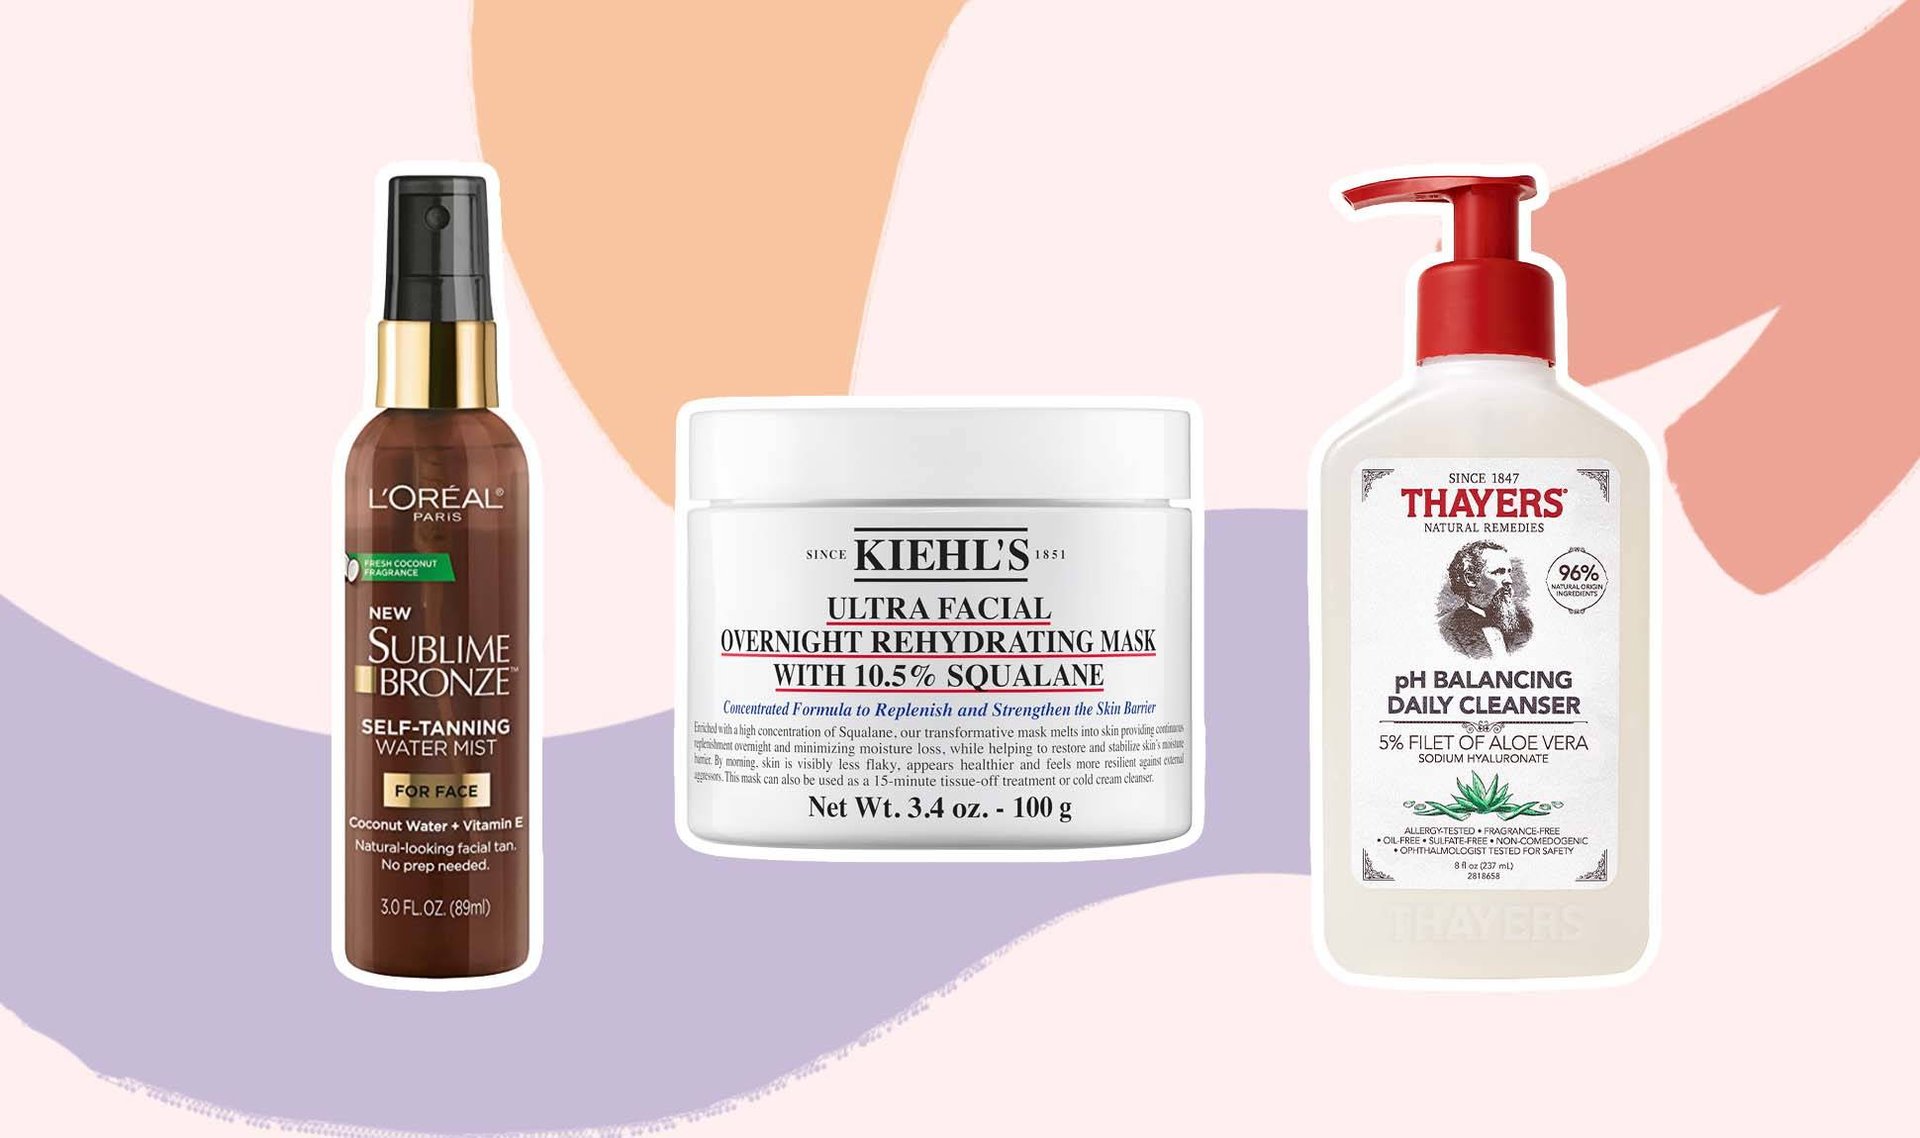 11 New Skincare Products to Add to Your Routine This Year